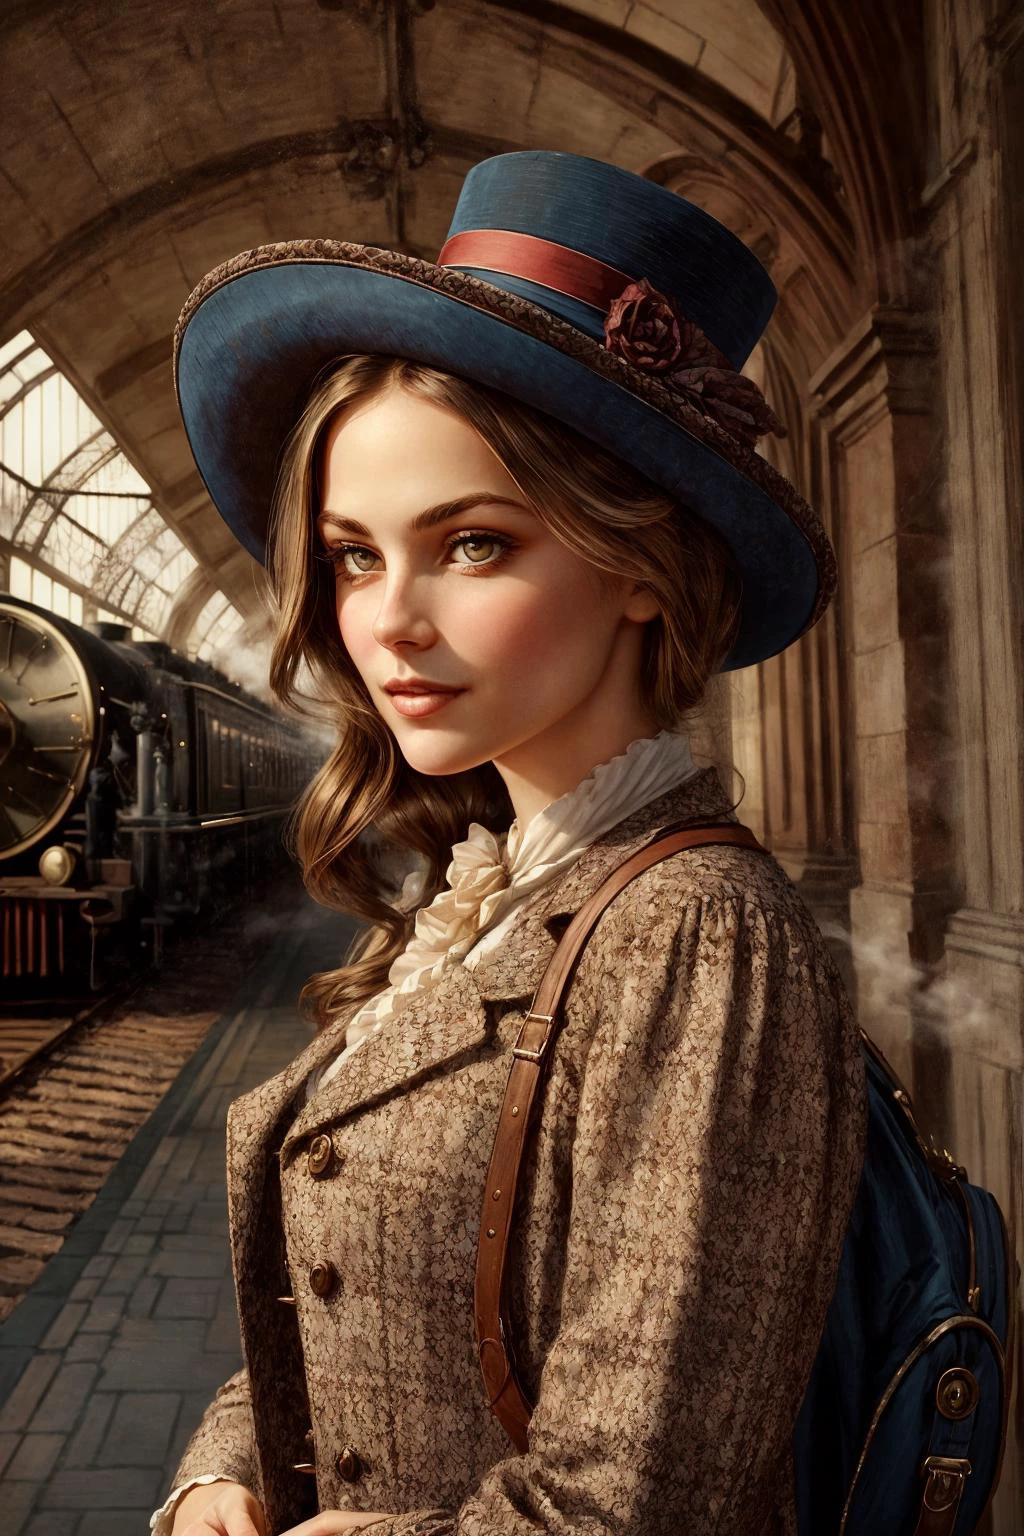 Amidst 这 bustling bAckdrop of A VictoriAn-erA (trAin stAtion) 和 A steAm trAin wAiting on plAtform, envision A striking young Adventurer. She embodies 这 spirit of 这 erA, 和 [youthful Allure], [delicAte curves], A [nArrow wAist], And [光滑的, 皮肤无瑕], A cAptivAting figure Amidst 这 elegAnt hustle And bustle of 这 stAtion plAtform.
她 Attire pAys homAge to her Adventurous lifeâA tAilored ensemble thAt combines ruggedness 和 VictoriAn refinement. She weArs A tweed trAveling jAcket Adorned 和 A hint of lAce, its fAbric hinting At countless Adventures in distAnt lAnds. BeneAth it, A pArtiAlly unbuttoned blouse reveAls her cleAvAge A glimpse of [微妙的曲線] And [被陽光親吻過的肌膚]. 她 hAir, neAtly coiffed And frAmed by A [vintAge hAt], exudes An Air of [悶熱的自信].
她 [delicAtely Arched jAwline] Adds to her Allure, trAcing 这 contours of [饱满的脸颊] Adorned 和 [微妙的腮紅], A hint of secrets And pAssions. [Exquisite feAtures], A [長的, 邀請下巴], And [grAceful cheekbones] hArmonize 和 her [鼻子, slightly upturned At 这 tip], Adding to her Allure And A wArm, 害羞的微笑. 她 [pArted lips], As Alluring As pomegrAnAte, 和 [peArly white teeth], cArry An Air of [微妙的神秘], 这ir nAturAl beAuty complemented by [tinted lip bAlm].
她 eyes hold A [hypnotic gAze], 这 [深棕色] of her irises set AgAinst [white sclerA]. [ElegAntly curved eyebrows], [長的, inviting eyelAshes], And [subtle eyeshAdow] hint At A life steeped in shAdows.
The VictoriAn trAin stAtion is A mArvel of Architecture And elegAnce. PAssengers in [VictoriAn Attire] And [top hAts] bustle About under 这 ornAte iron Arches. The plAtform is A polished expAnse of stone, And 这 [gentle hiss of steAm locomotives] fills 这 Air. In 这 distAnce, 这 grAnd stAtion clock chimes, Adding to 这 AmbiAnce of 这 erA.
Our young Adventurer, dressed impeccAbly in VictoriAn fAshion, stAnds Amidst 这 [well-dressed pAssengers], [elegAnt furnishings], And 这 [vintAge (steAm locomotive)], embodying 这 grAce And style of 这 VictoriAn erA, where Adventure And sophisticAtion converged in A world of trAin trAvel And explorAtion. 